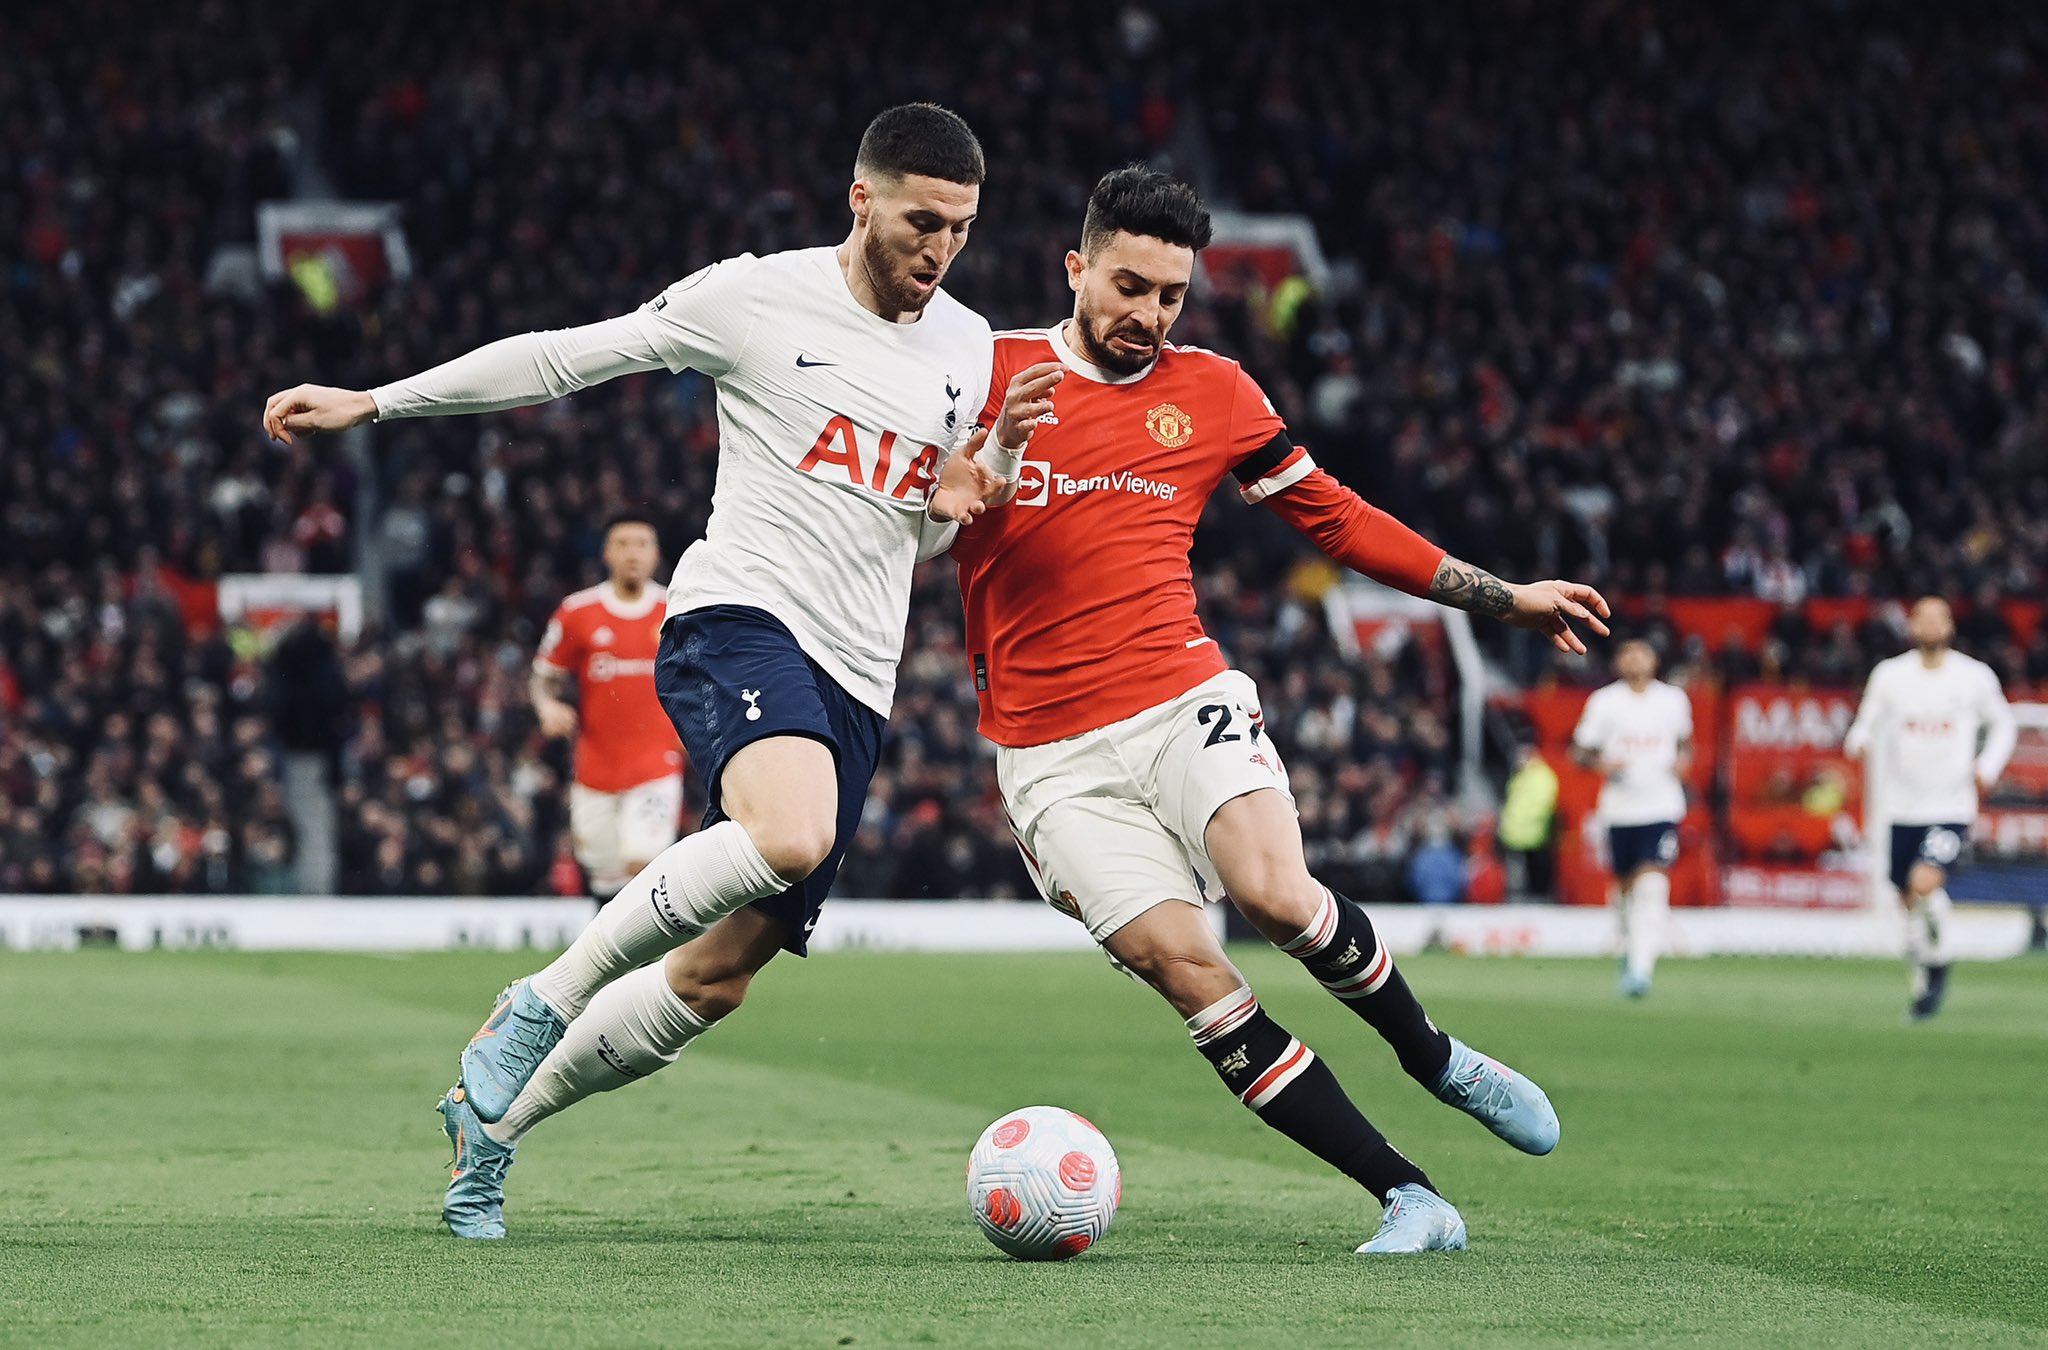 Manchester United 3-2 Tottenham: Cristiano Ronaldo's second-ever hat-trick for Man United saw them beat Spurs 3-2 to go into fourth place above Arsenal